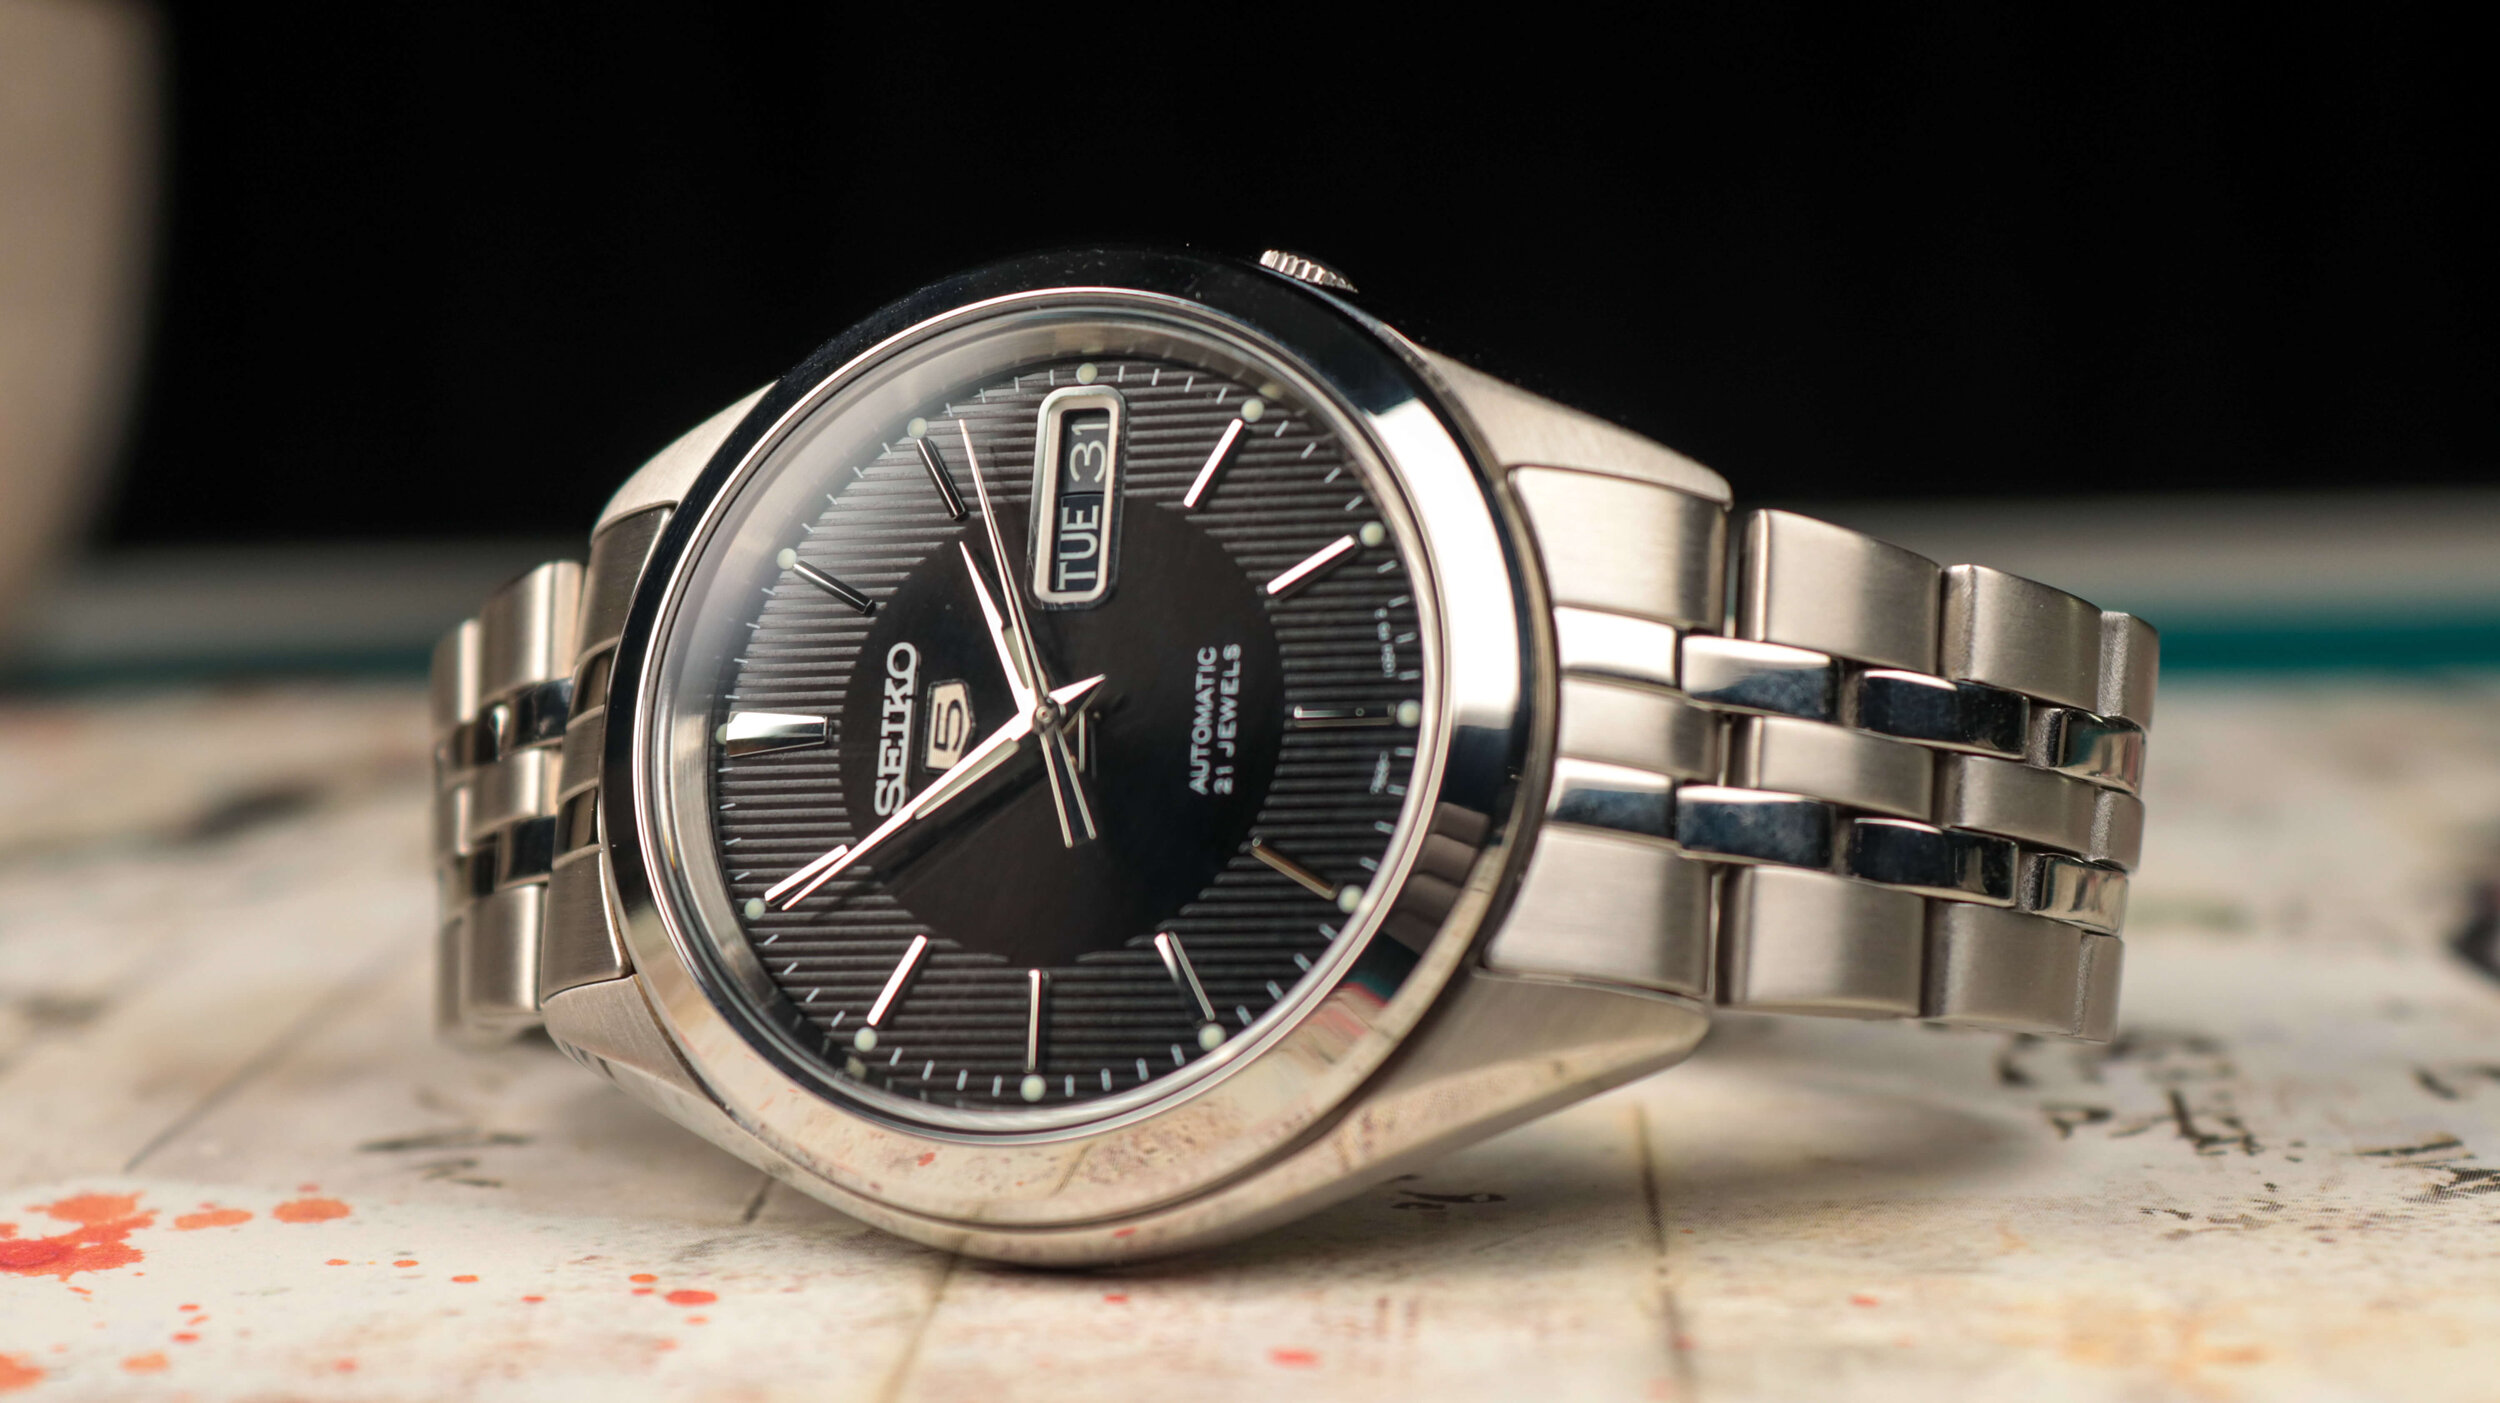 Seiko SNKL23 Review - Seiko's Best Cheap Watch Is Returning? — Ben's Watch  Club